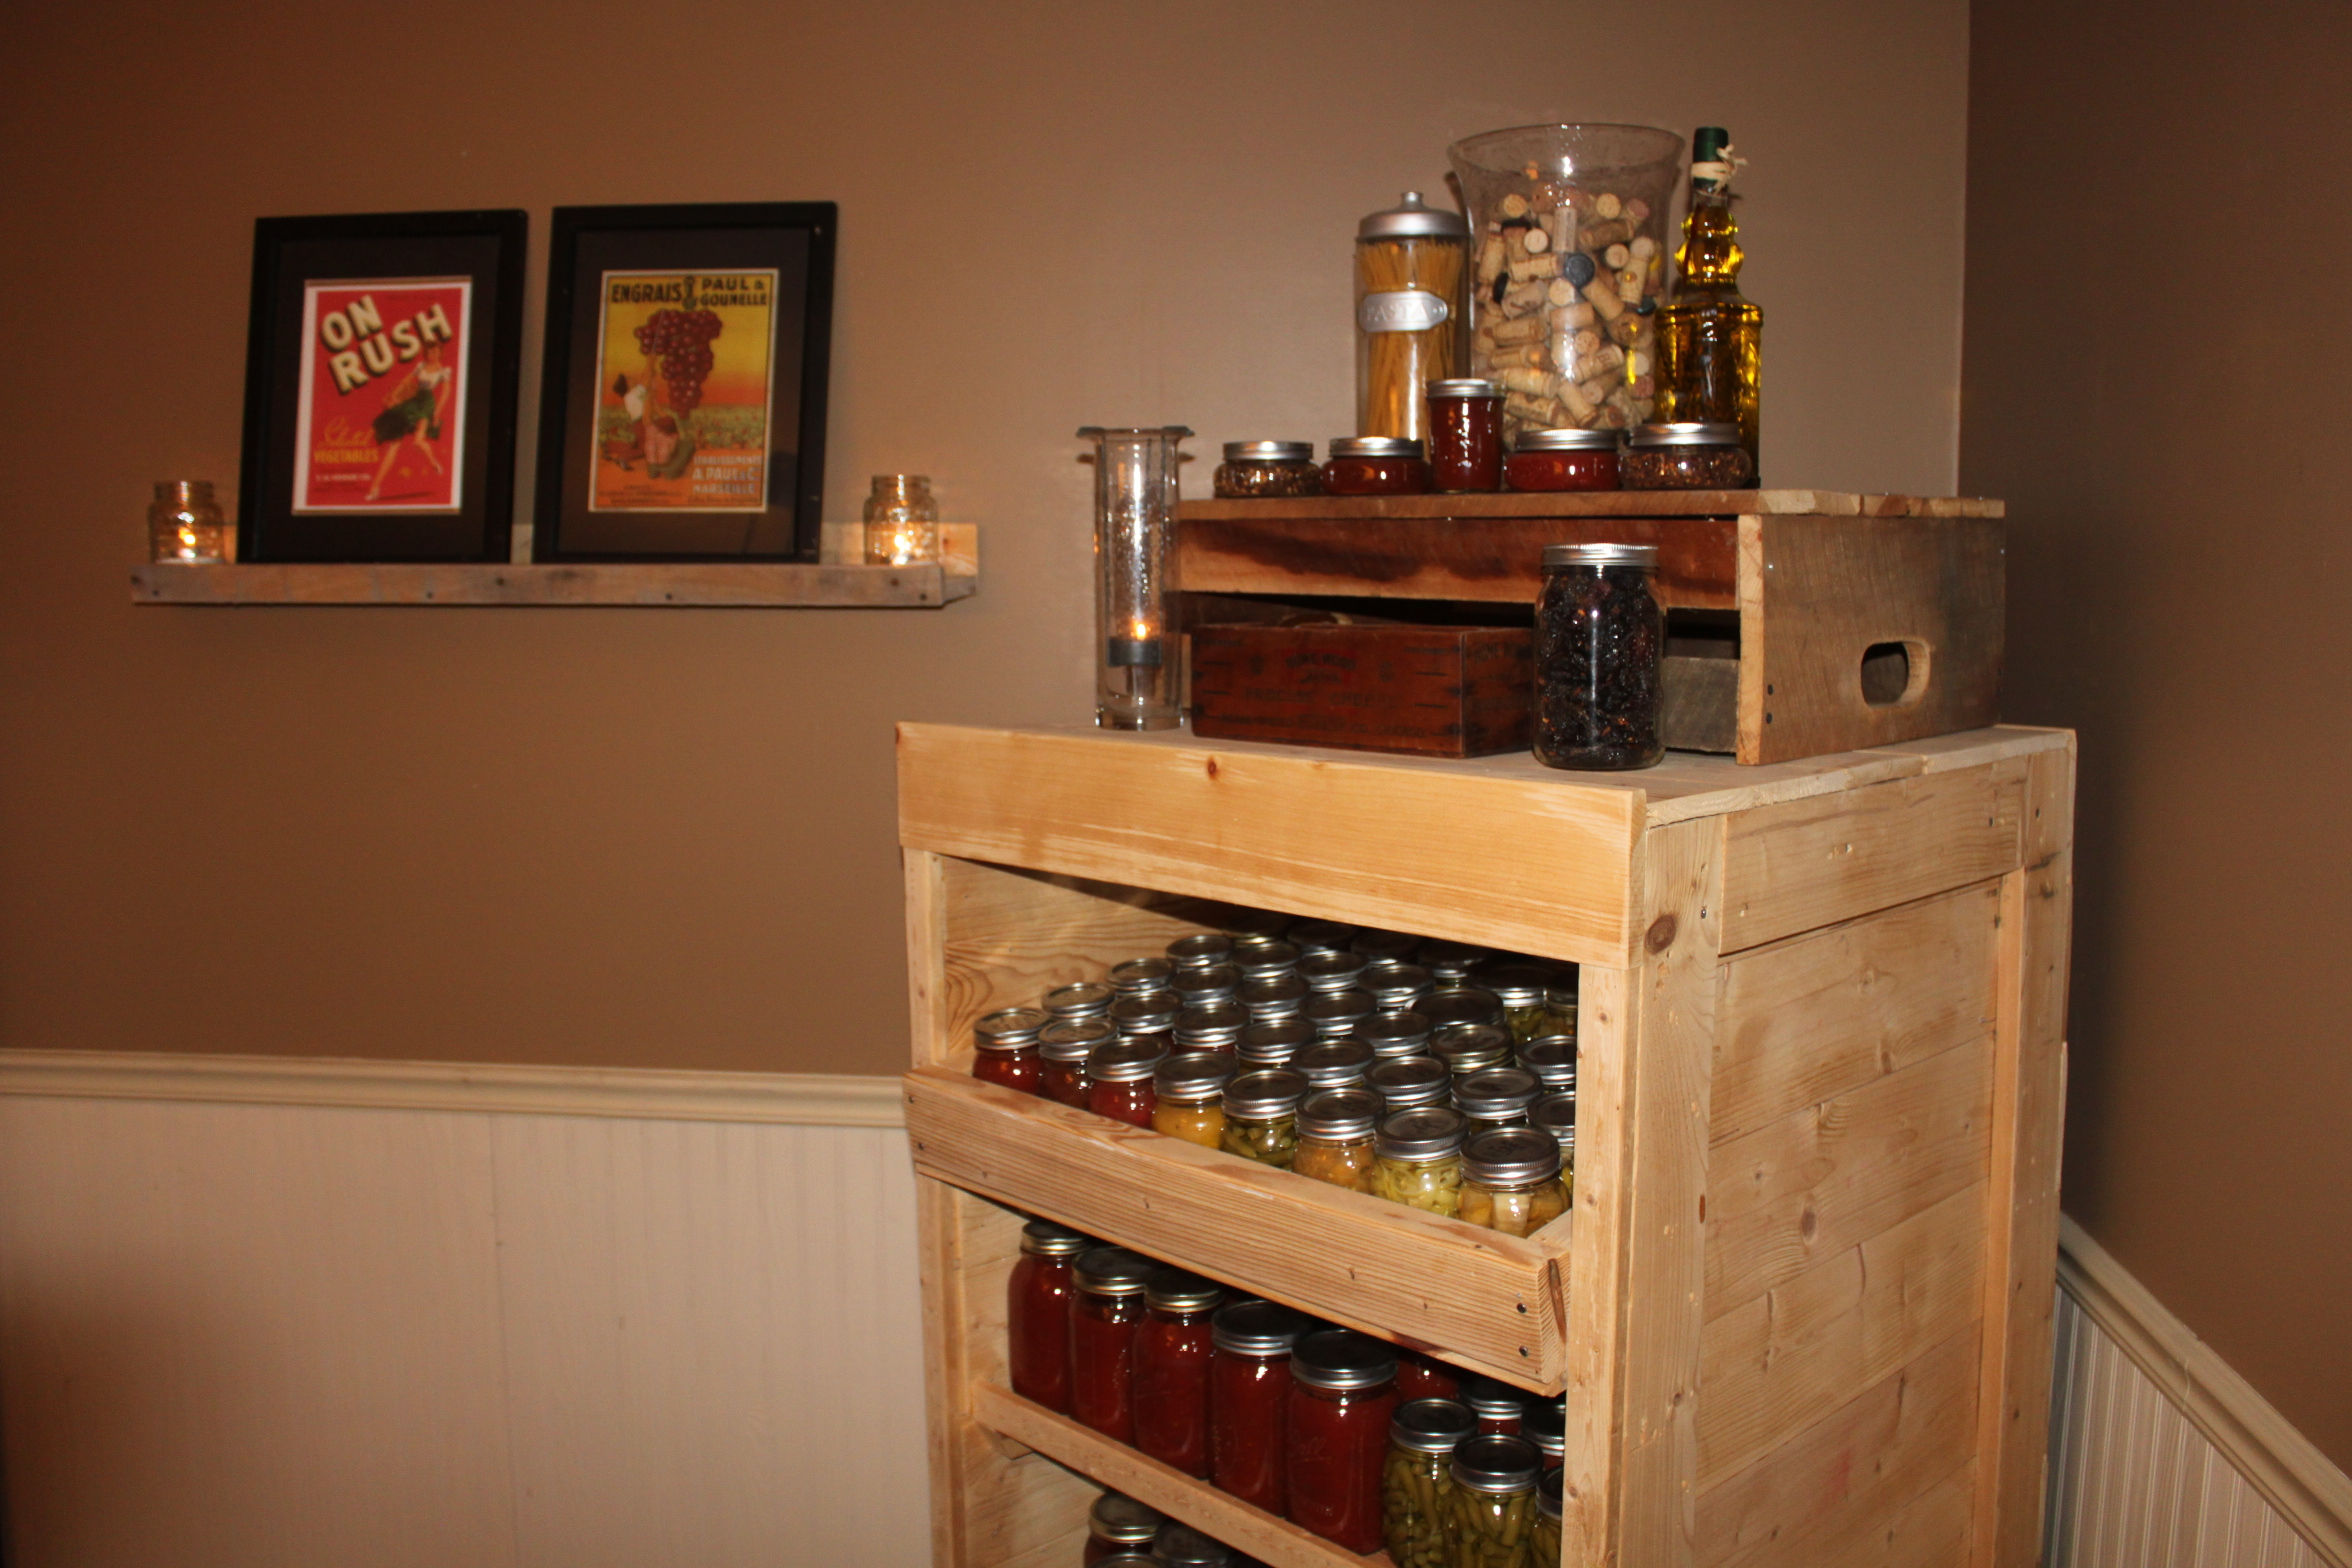 30+ Creative Pallet Furniture DIY Ideas and Projects --> Canning Pantry Cupboard Built from Pallets